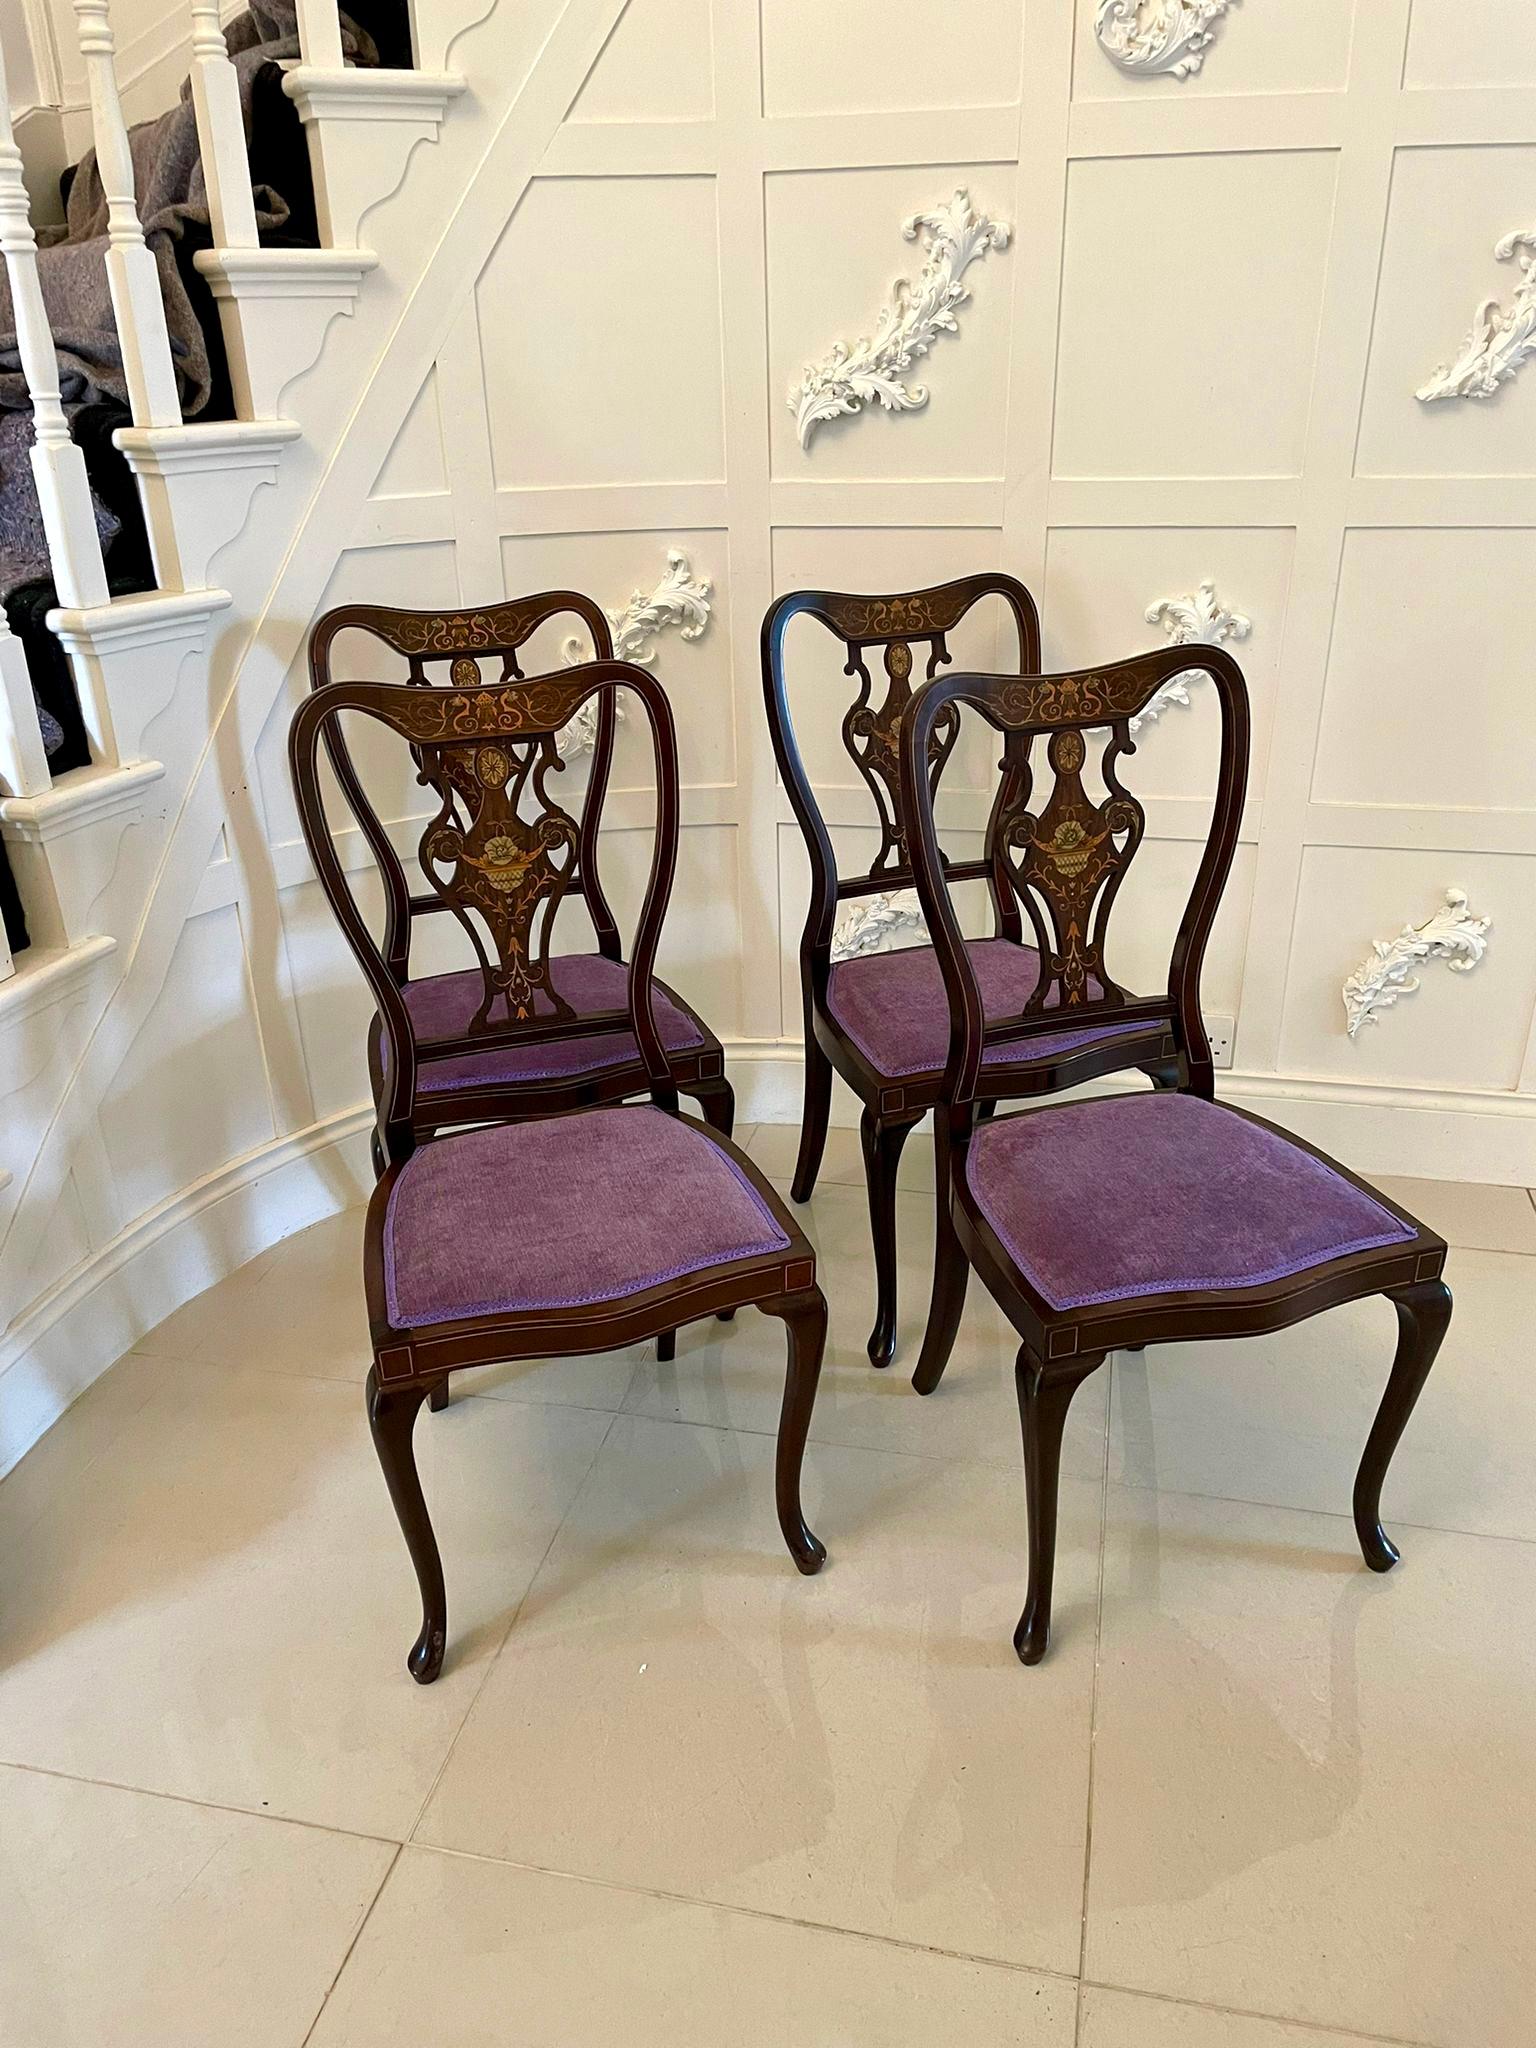 Fine quality antique Victorian set of four marquetry inlaid chairs having pretty shaped backs with fine quality marquetry inlay, newly reupholstered serpentine shaped seats in a quality fabric, inlaid frieze and standing on elegant shaped cabriole